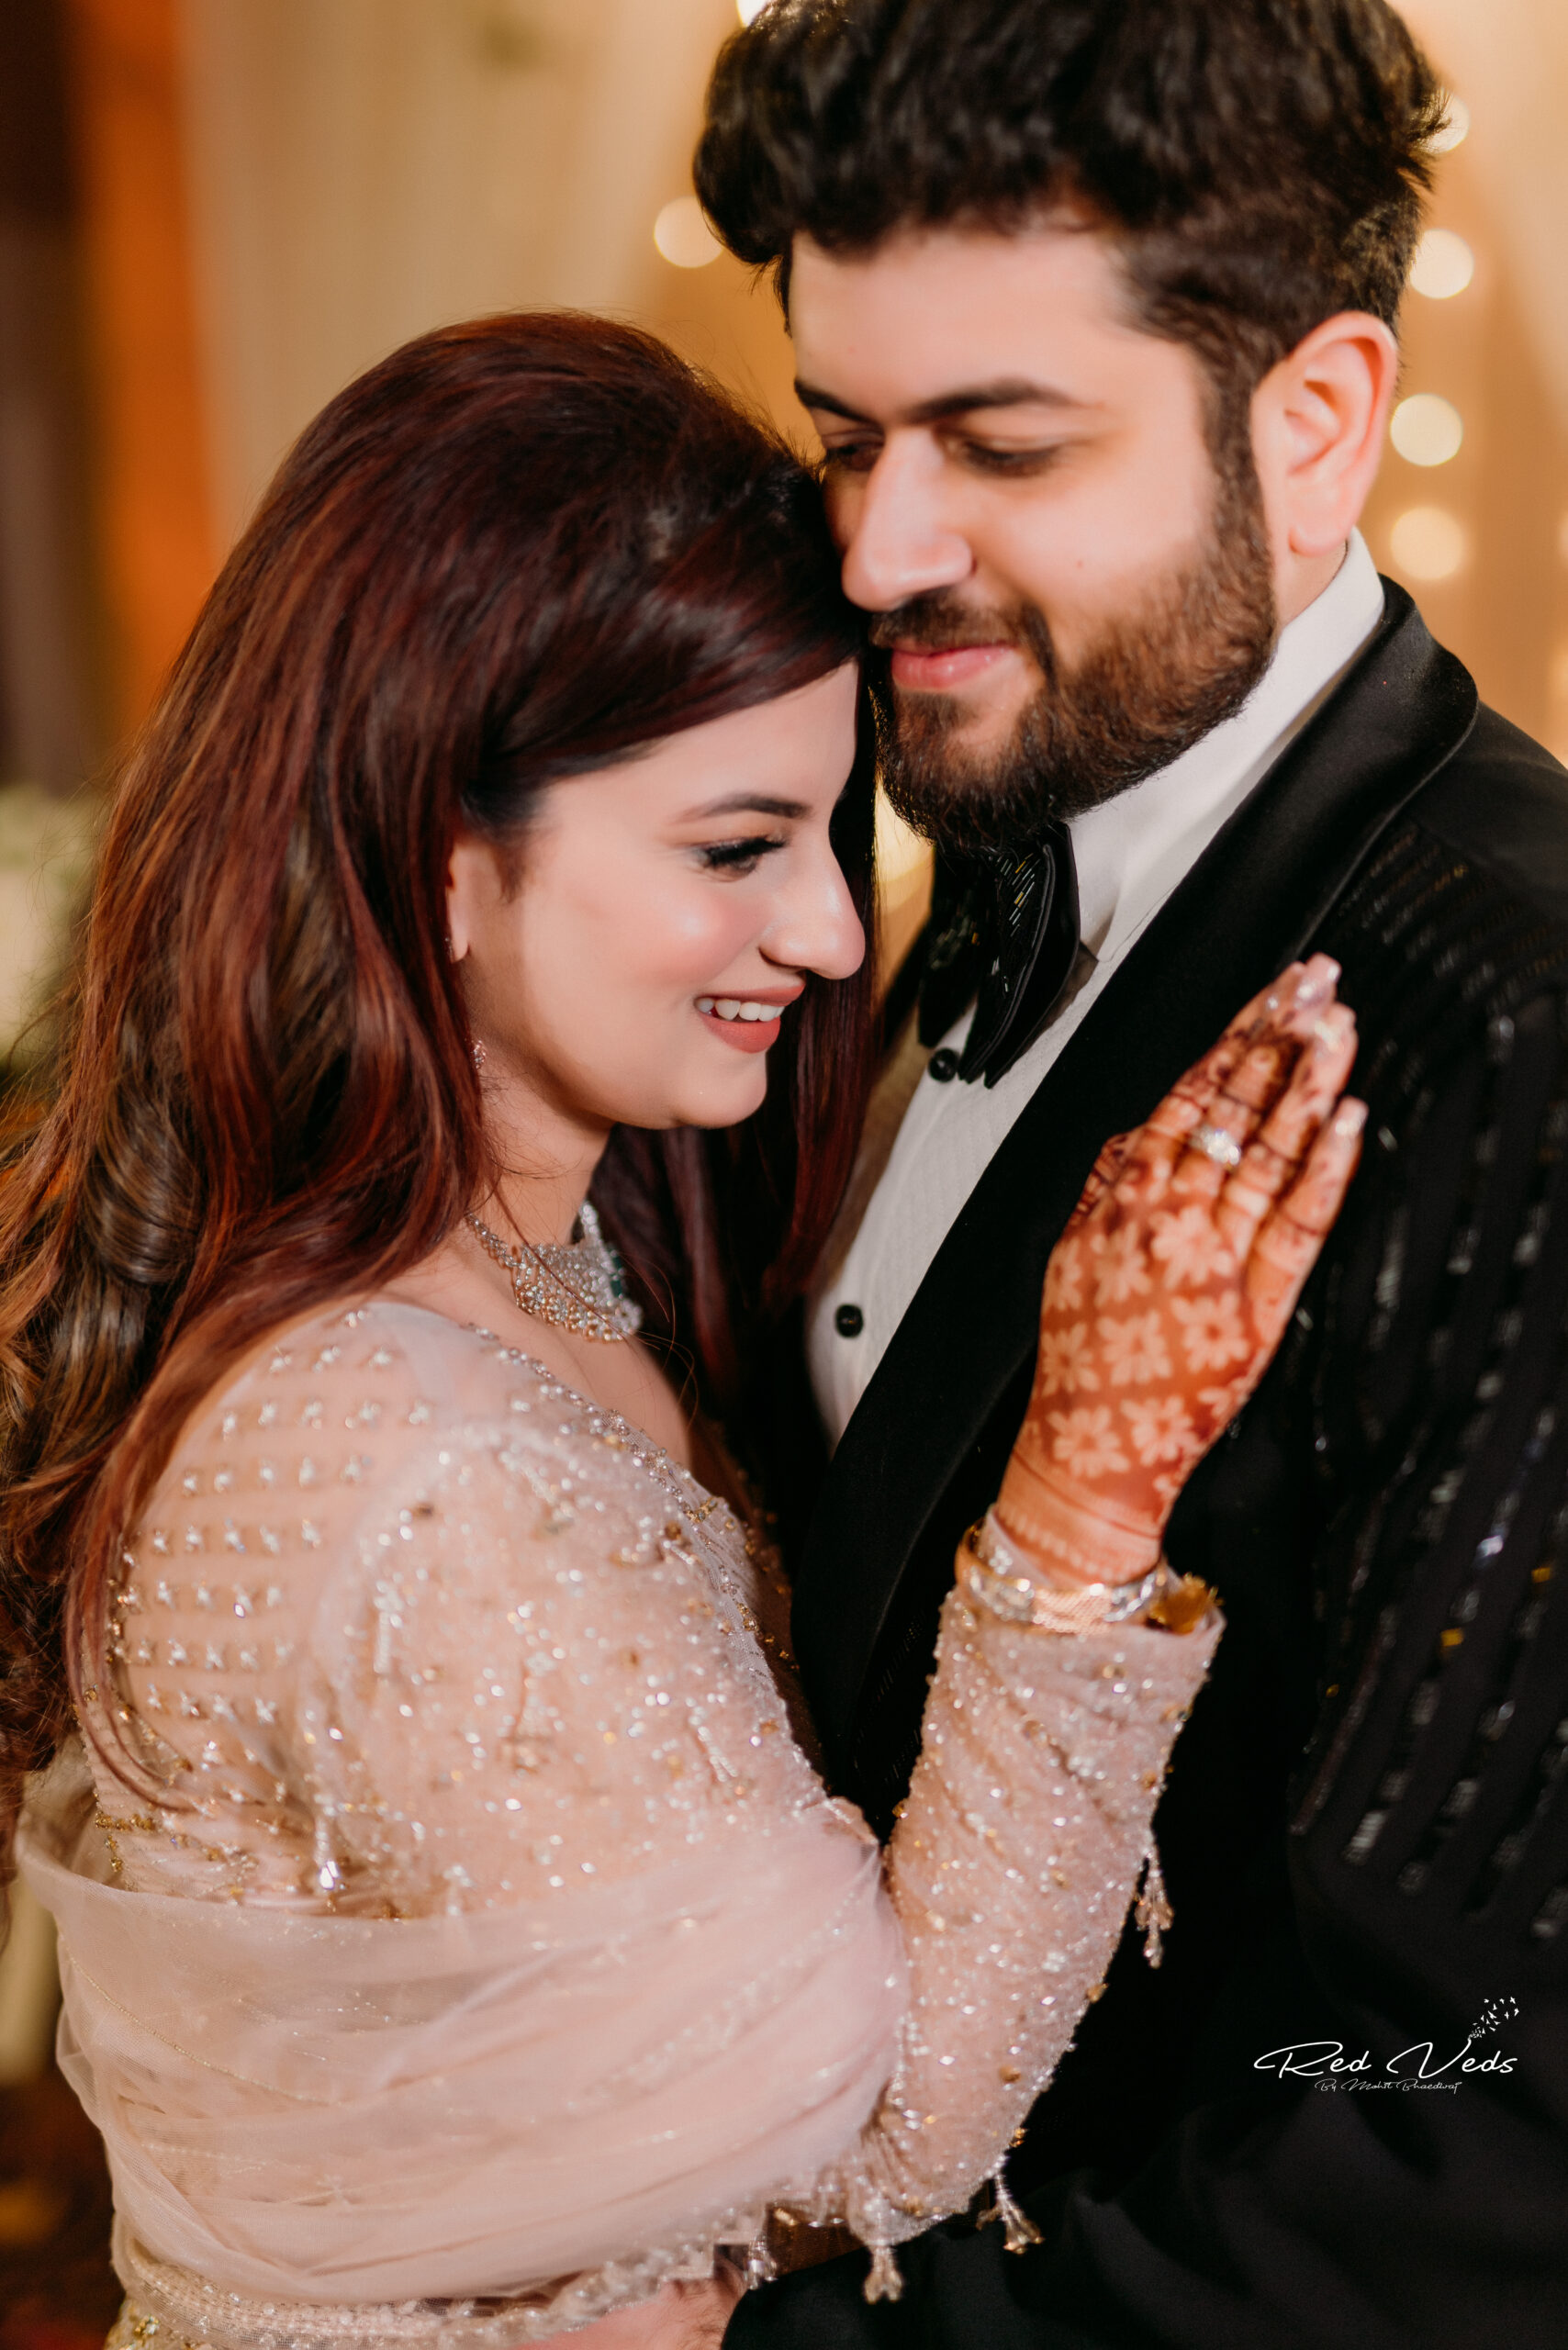 Gorgeous Wedding With Breathtaking Bridal Outfits | Indian wedding  photography couples, Couple wedding dress, Wedding couple poses photography